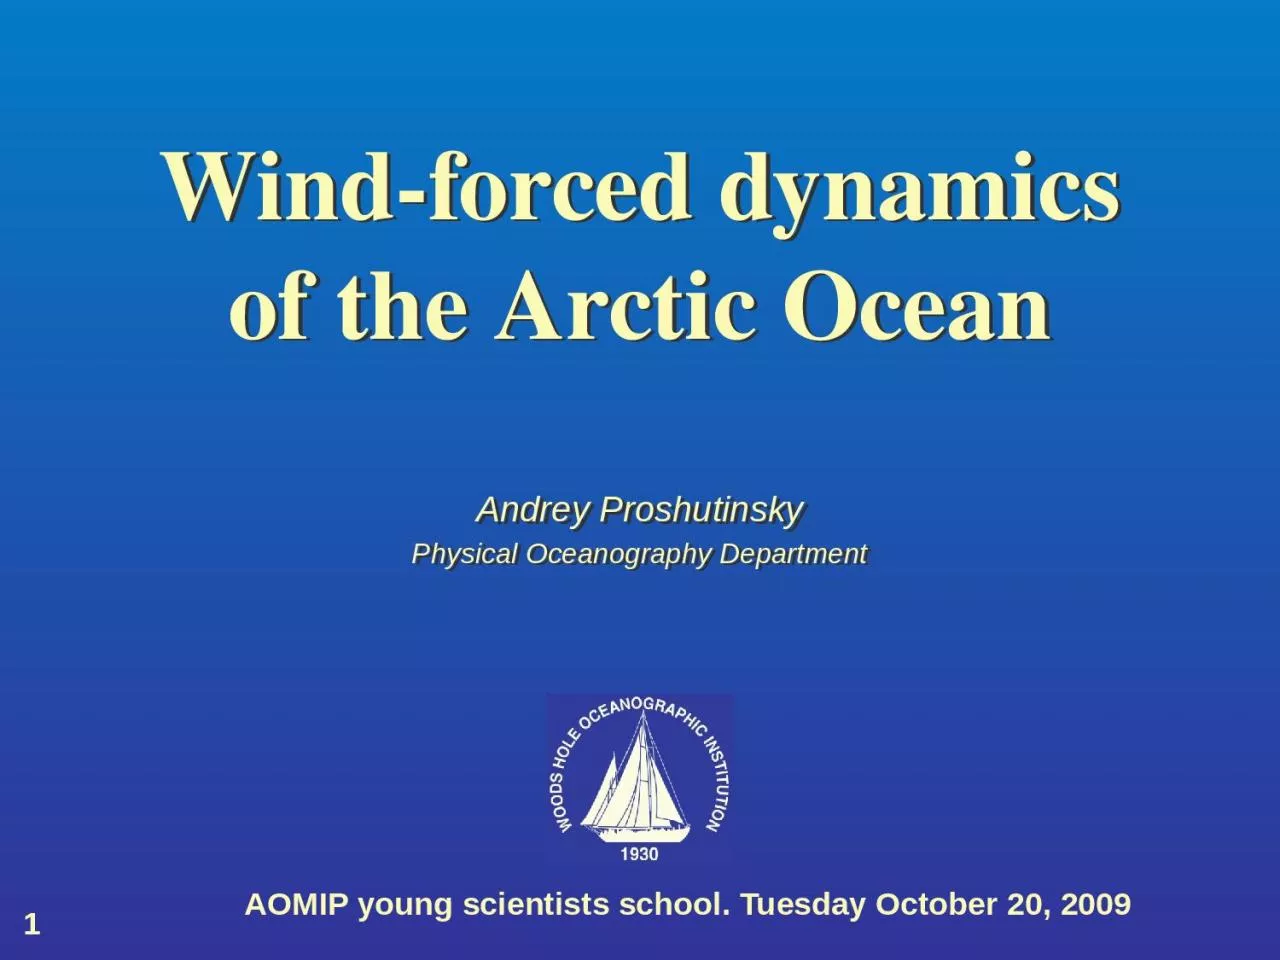 Wind-forced dynamics of the Arctic Ocean